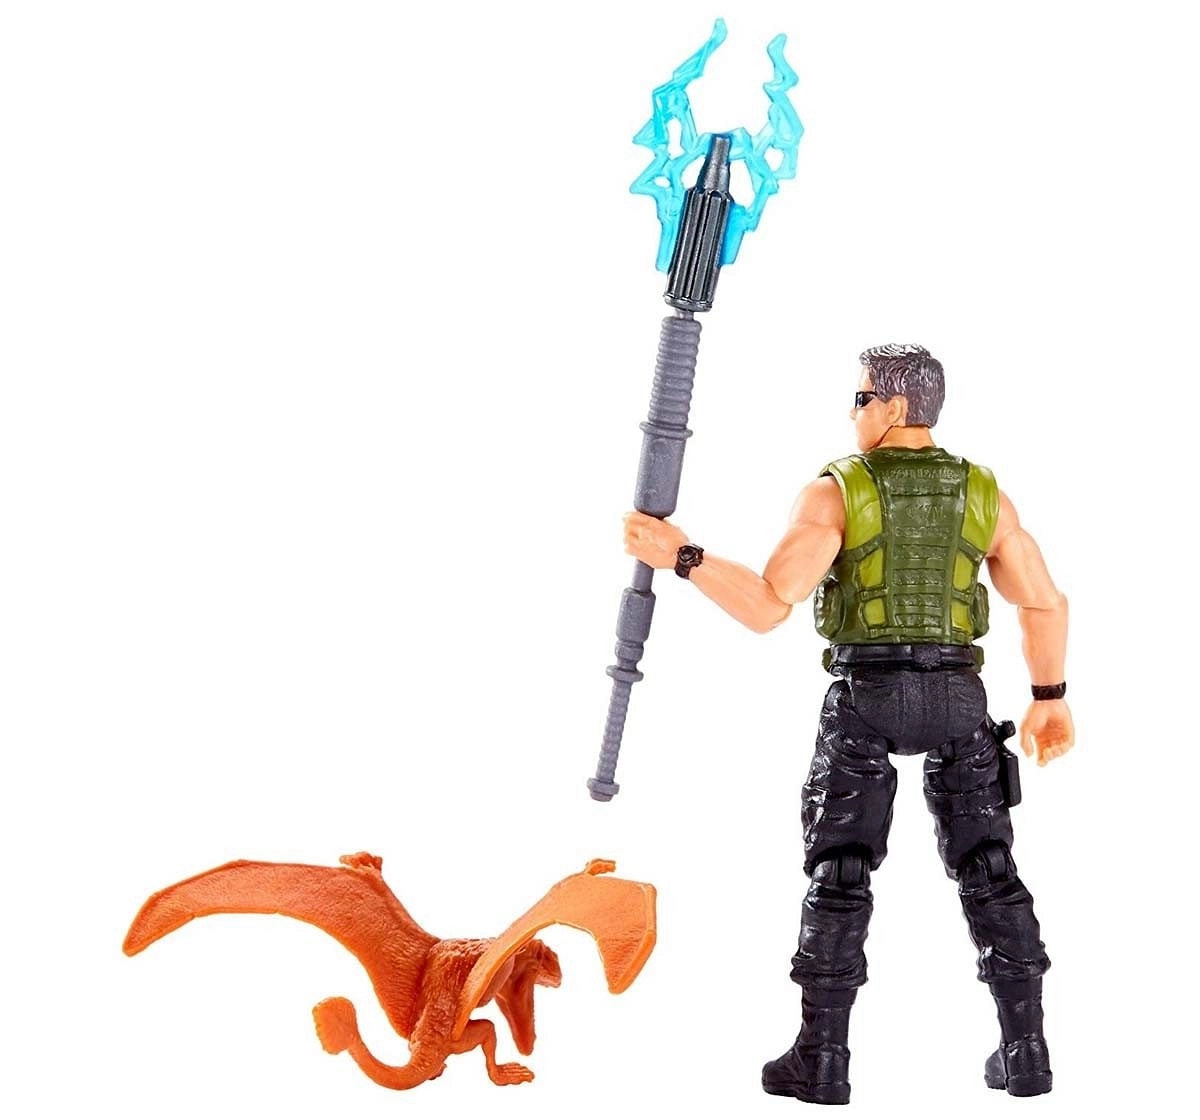 Jurassic World Action Products Mercenary Tranquilizer Action Figures for Kids age 4Y+, Assorted